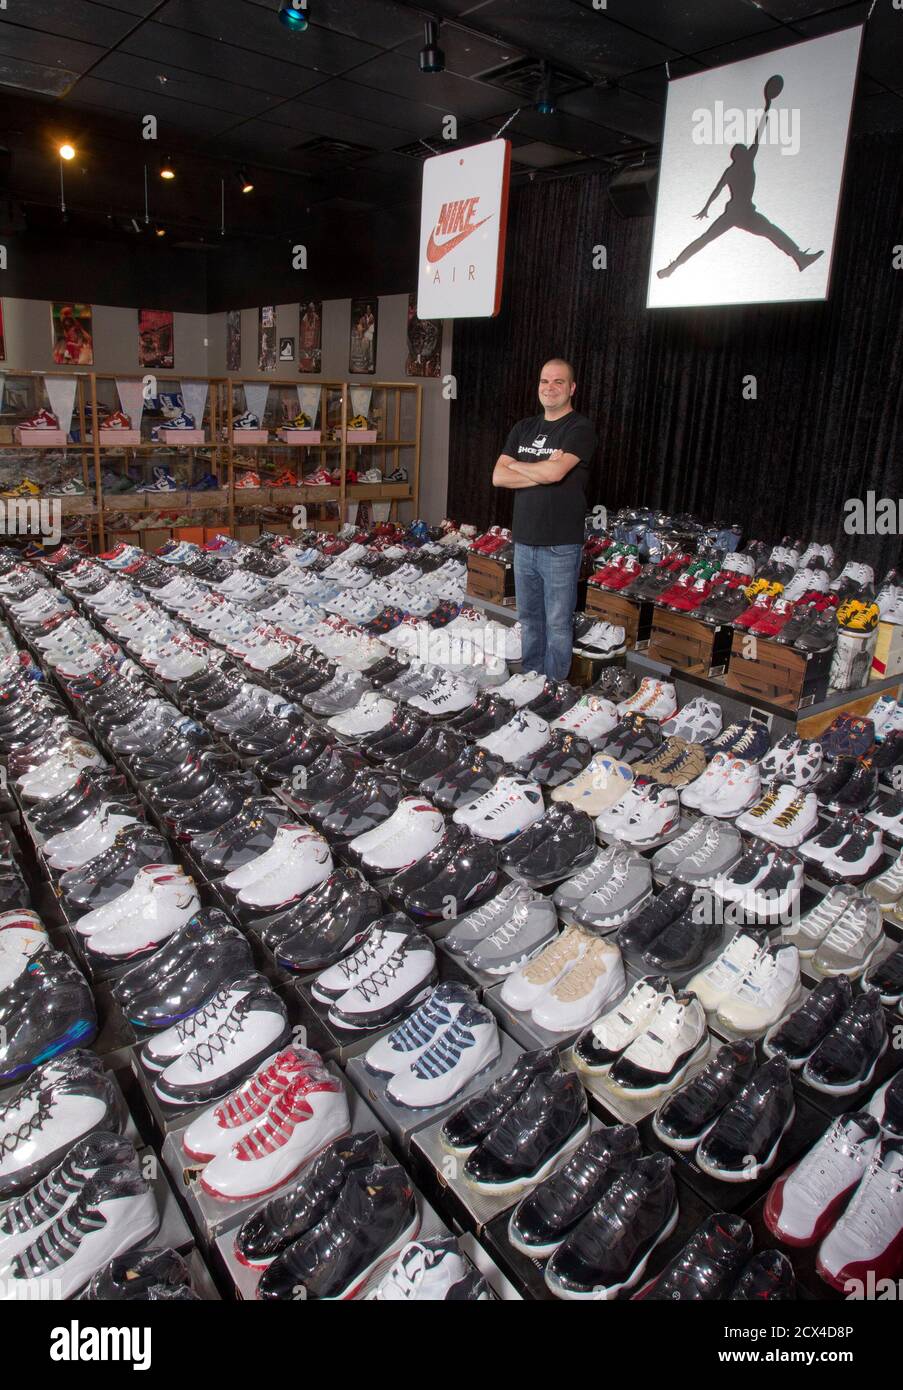 Jordan Michael Geller Poses With His Collection Of The Nike Air Jordan Retro Line At The Shoezeum In Downtown Las Vegas Nevada September 25 12 Record Keepers At The Guinness Book Of